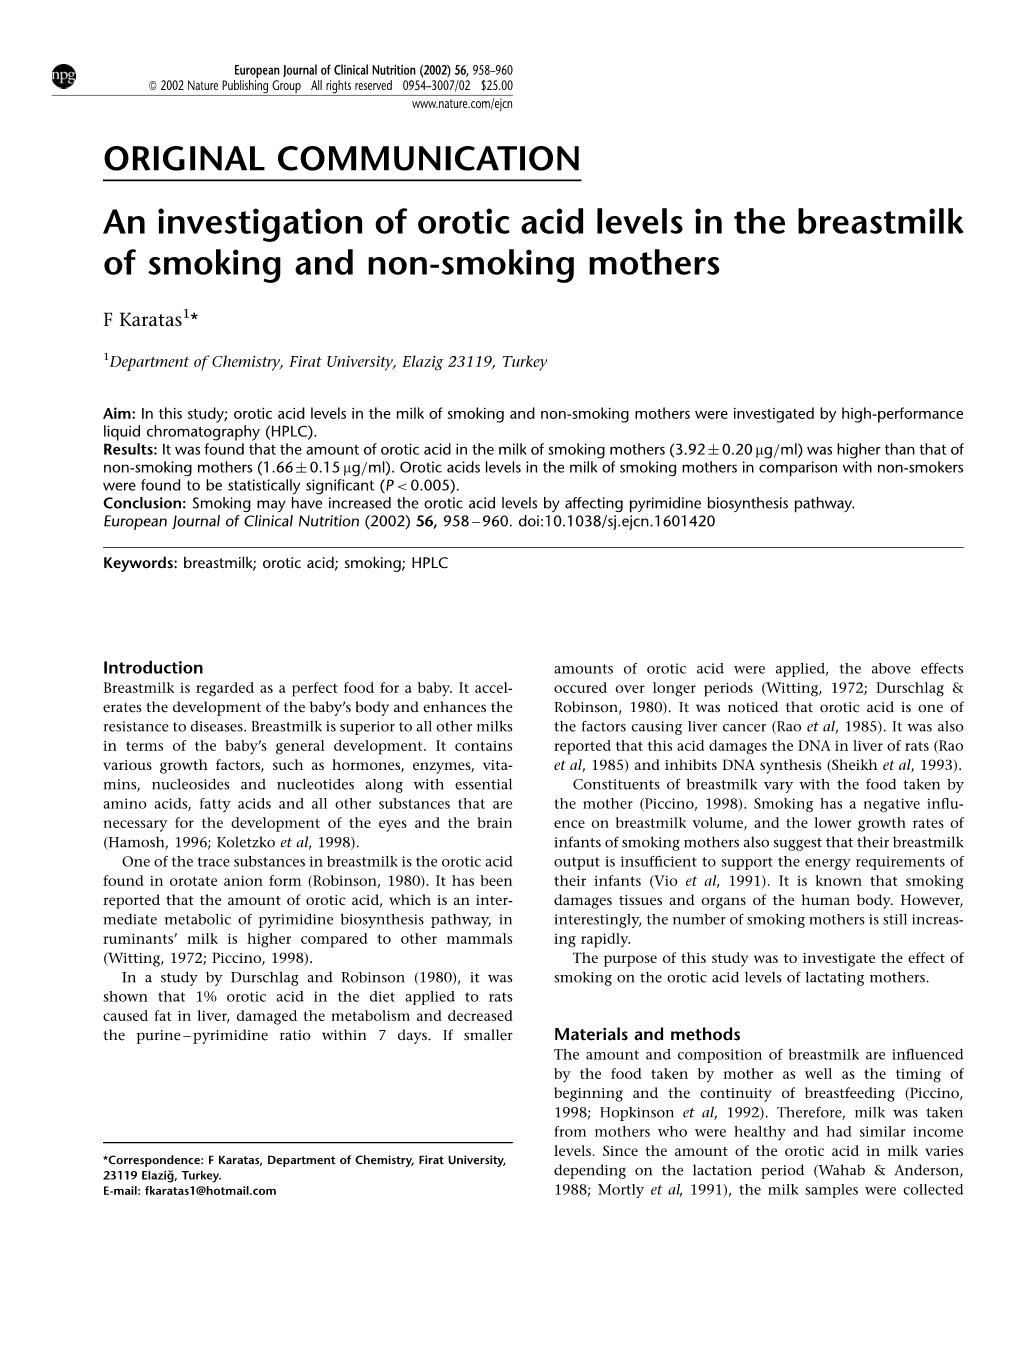 An Investigation of Orotic Acid Levels in the Breastmilk of Smoking and Non-Smoking Mothers